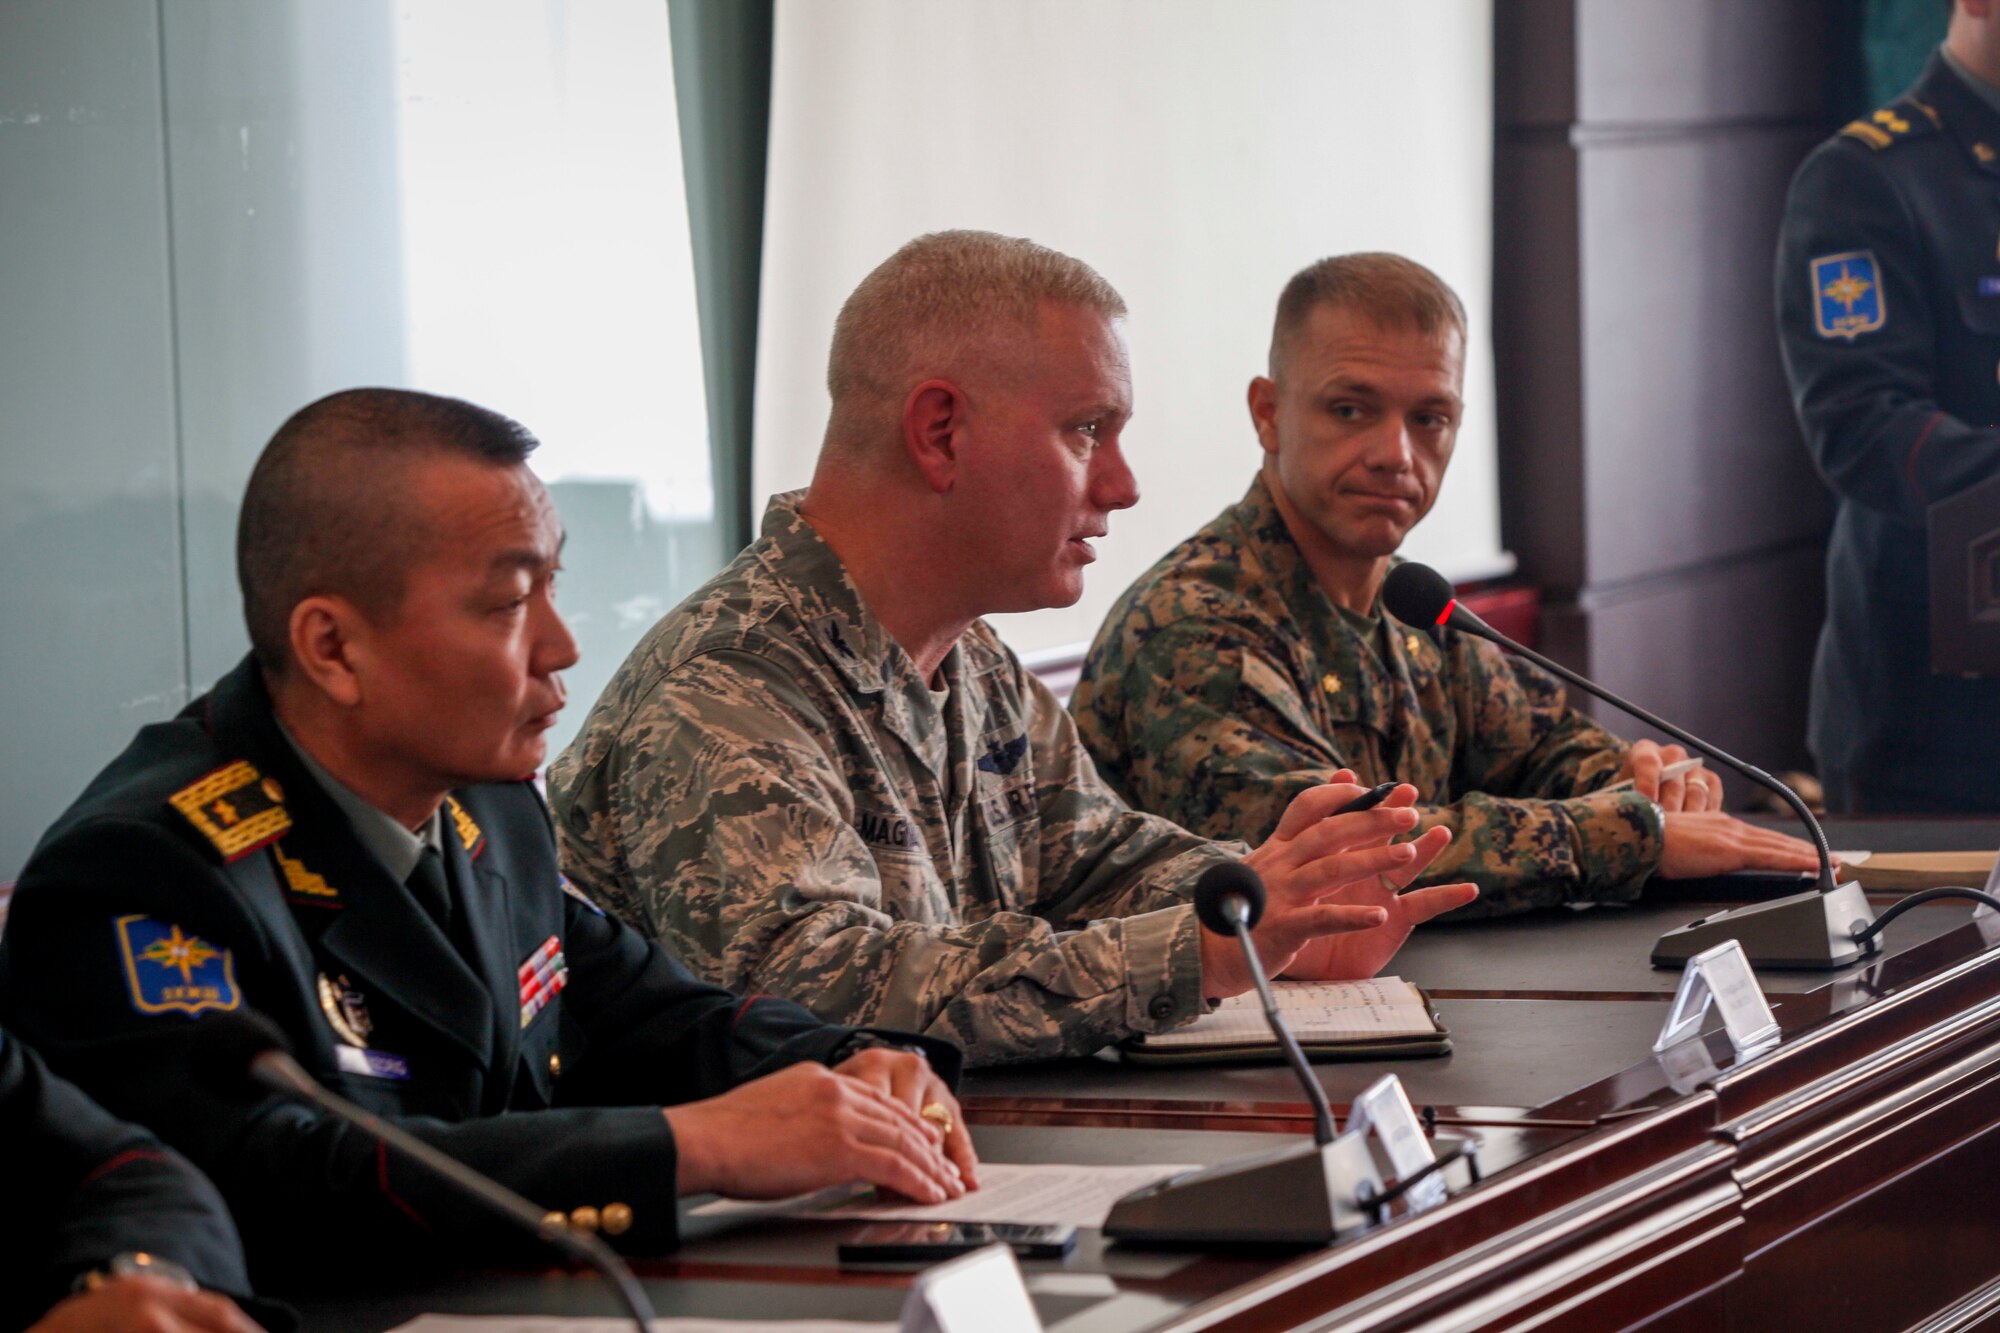 Mongolian Armed Forces Brig. Gen. D.Ganzorig, left, U.S. Air Force Col. Carl Magnusson, center, exercise co-director for Khaan Quest 16 and U.S. Marine Corps Maj. Robert Shuford, answer questions about the exercise at a media engagement at the Ministry of Defense, in Ulaanbatar, Mongolia, May 20, 2016. Khaan Quest is an annual, multinational peacekeeping operations exercise conducted in Mongolia and is the capstone exercise for this year's United Nations Global Peace Operations Initiative program. (U.S. Marine Corps photo by Cpl. Hilda M. Becerra / Released)